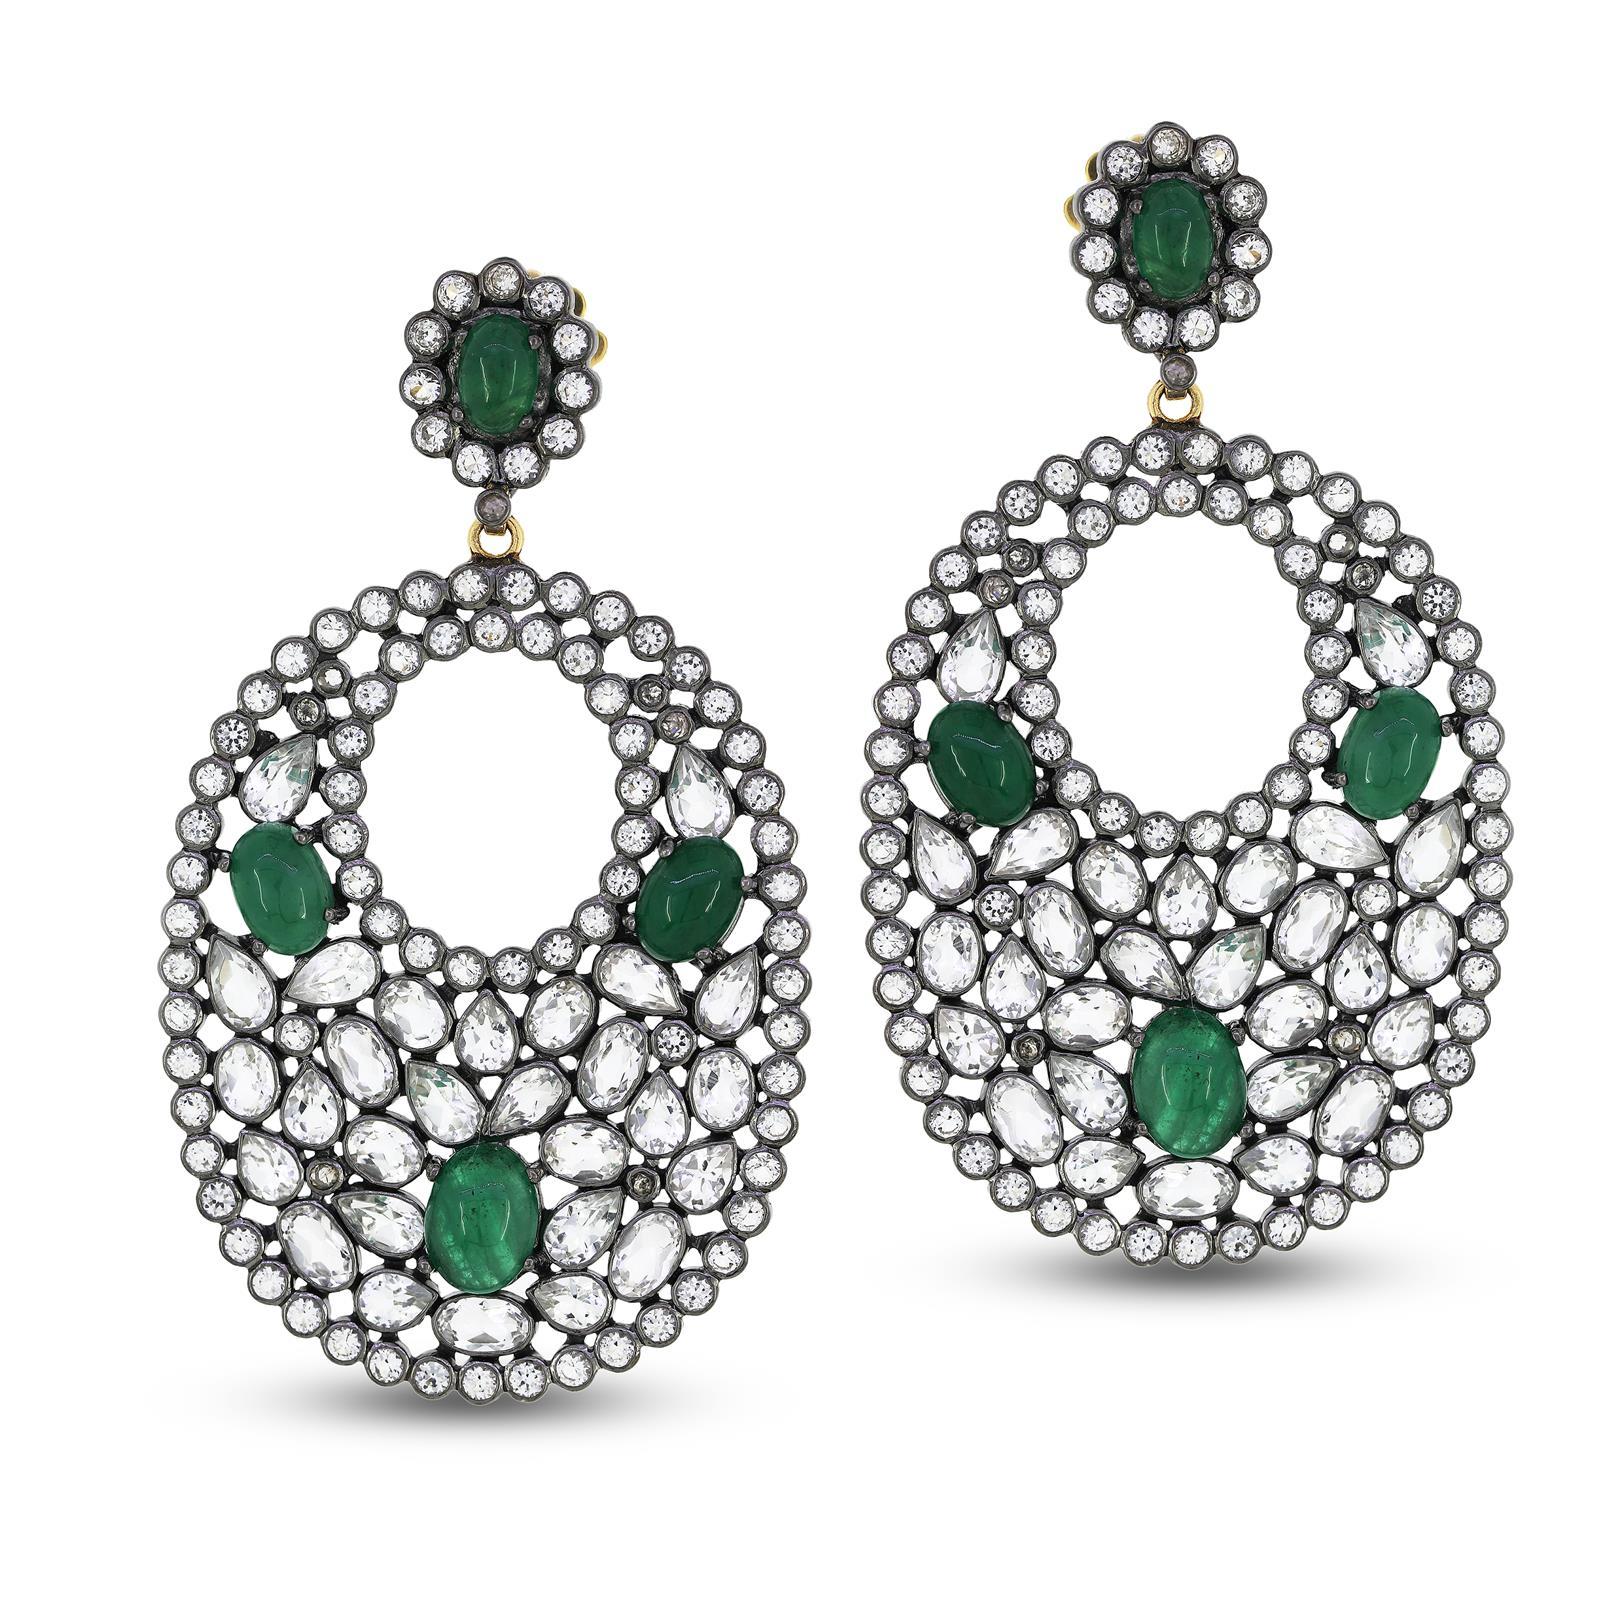 Pear Cut Victorian 27.2cttw White Topaz, Emerald and Diamond Drop Earrings in 18/925